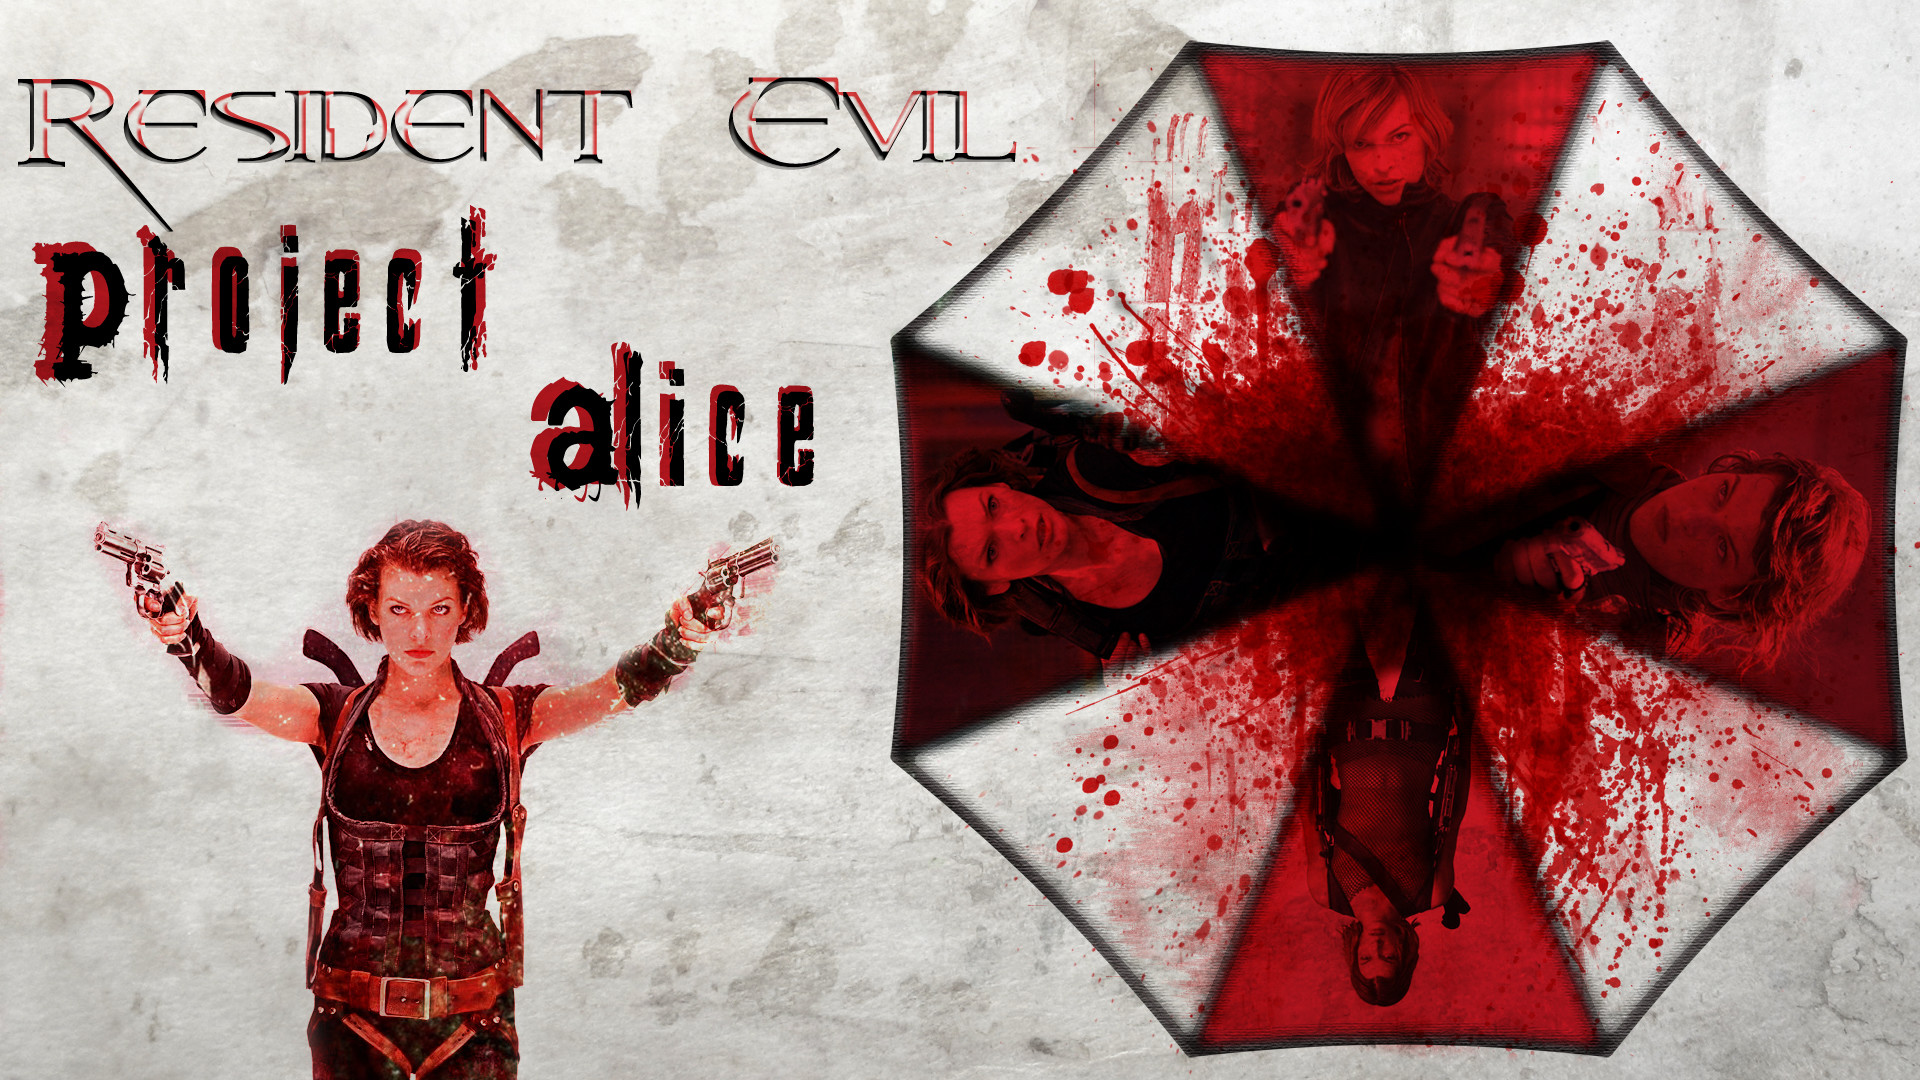 1920x1080 Resident Evil Project Alice